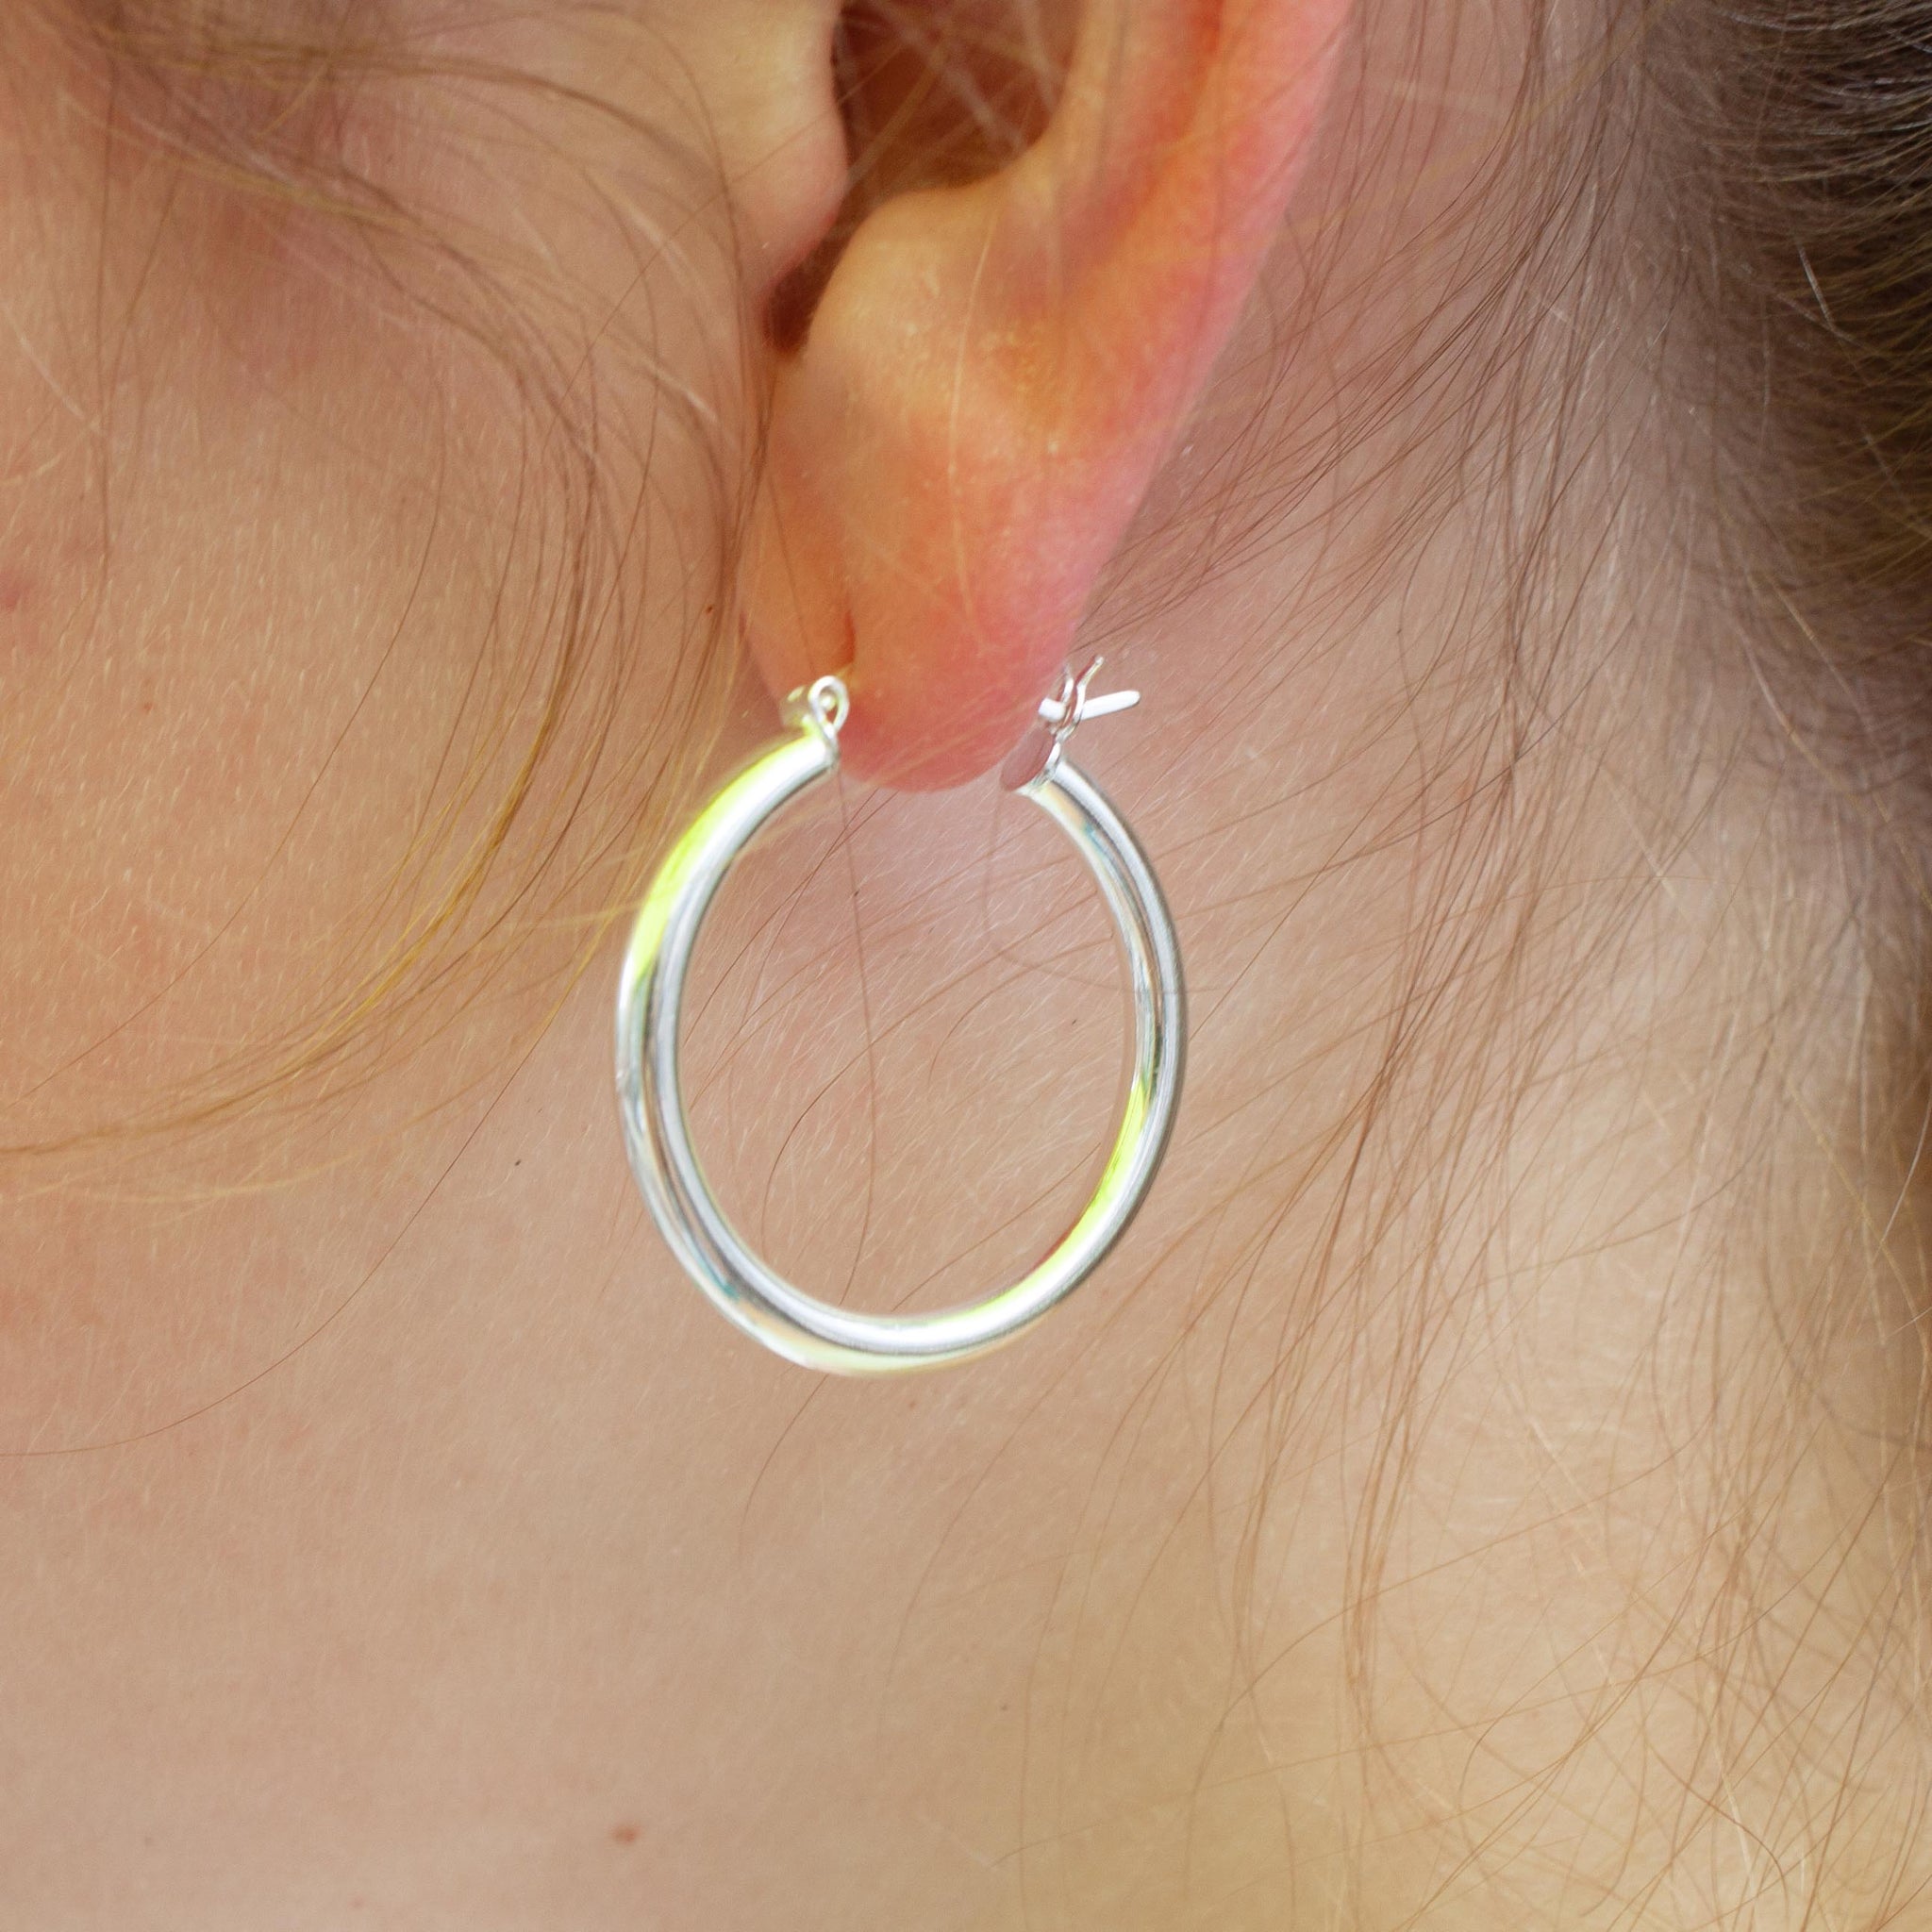 Make a statement with these substantial yet delicate silver hoops.  sterling silver hoop earrings.  25mm diameter. kp jewelry co.